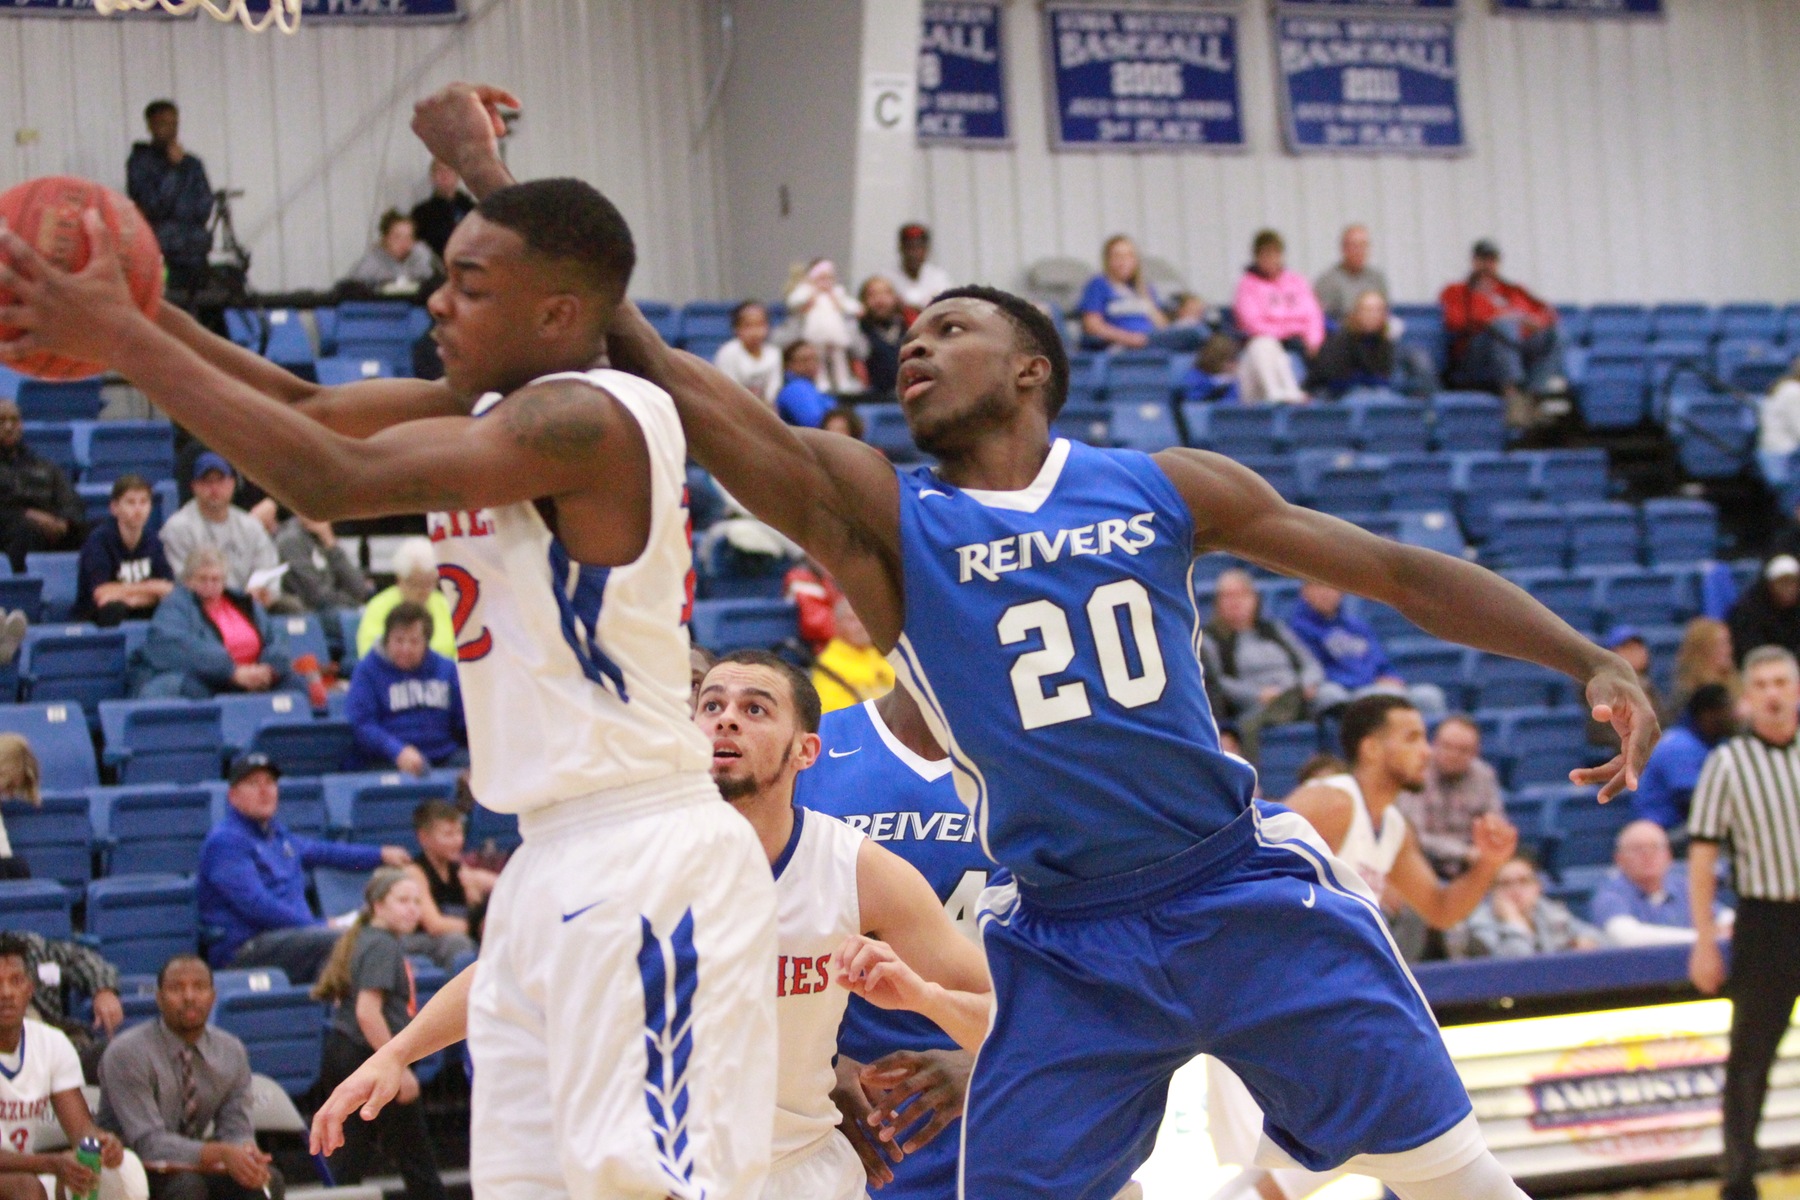 Steph Ayangma and his Reiver teammates dropped back to back games for only the first time all season in their 77-59 loss at Marshalltown. After four out of the last five games on the road, the Reivers return to Reiver Arena this Saturday night (2/3/18).